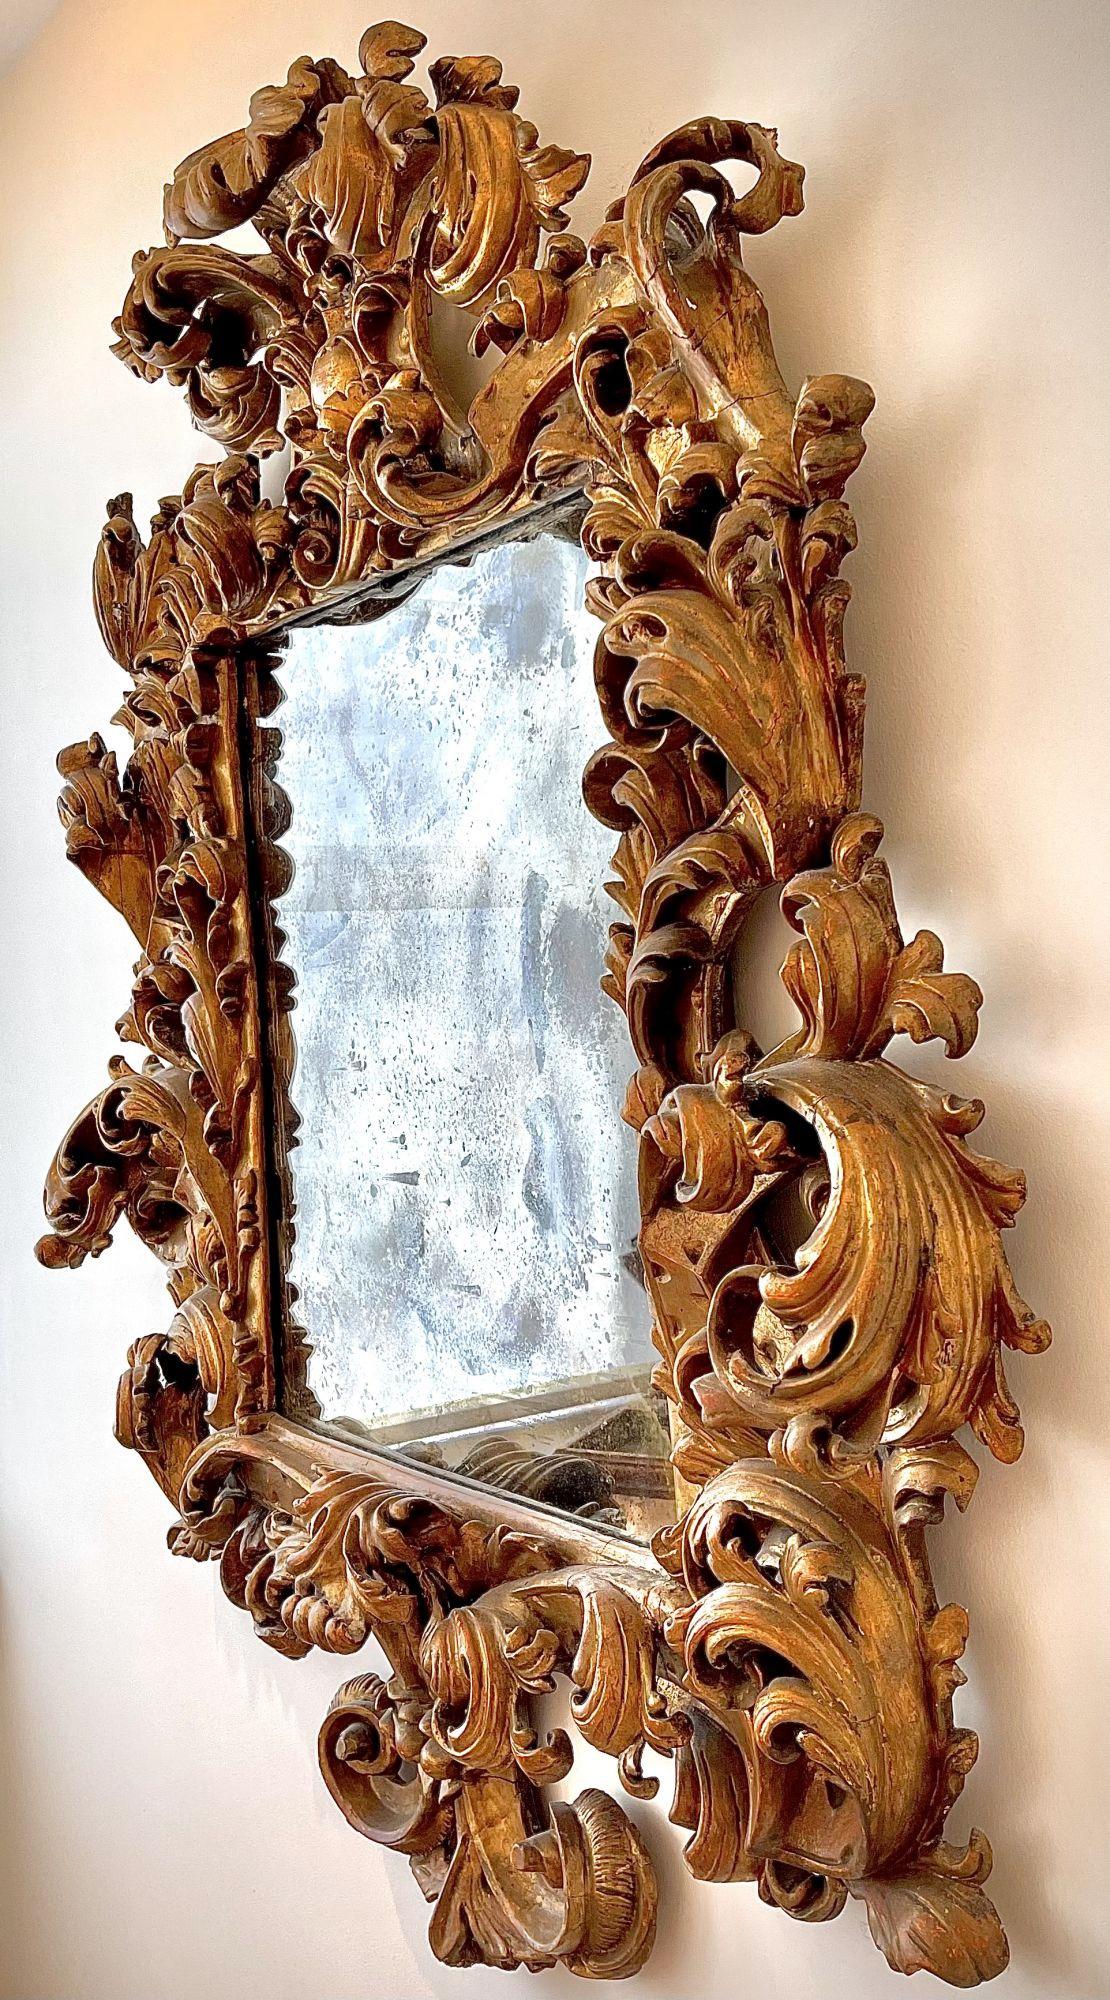 A Palatial and Museum quality Italian 18th century Florentine Rococo gilt wood carved mirror frame. The ornately carved frame with scrolls and acanthus, all gilt is original. Circa: Florence, 1770-1780.